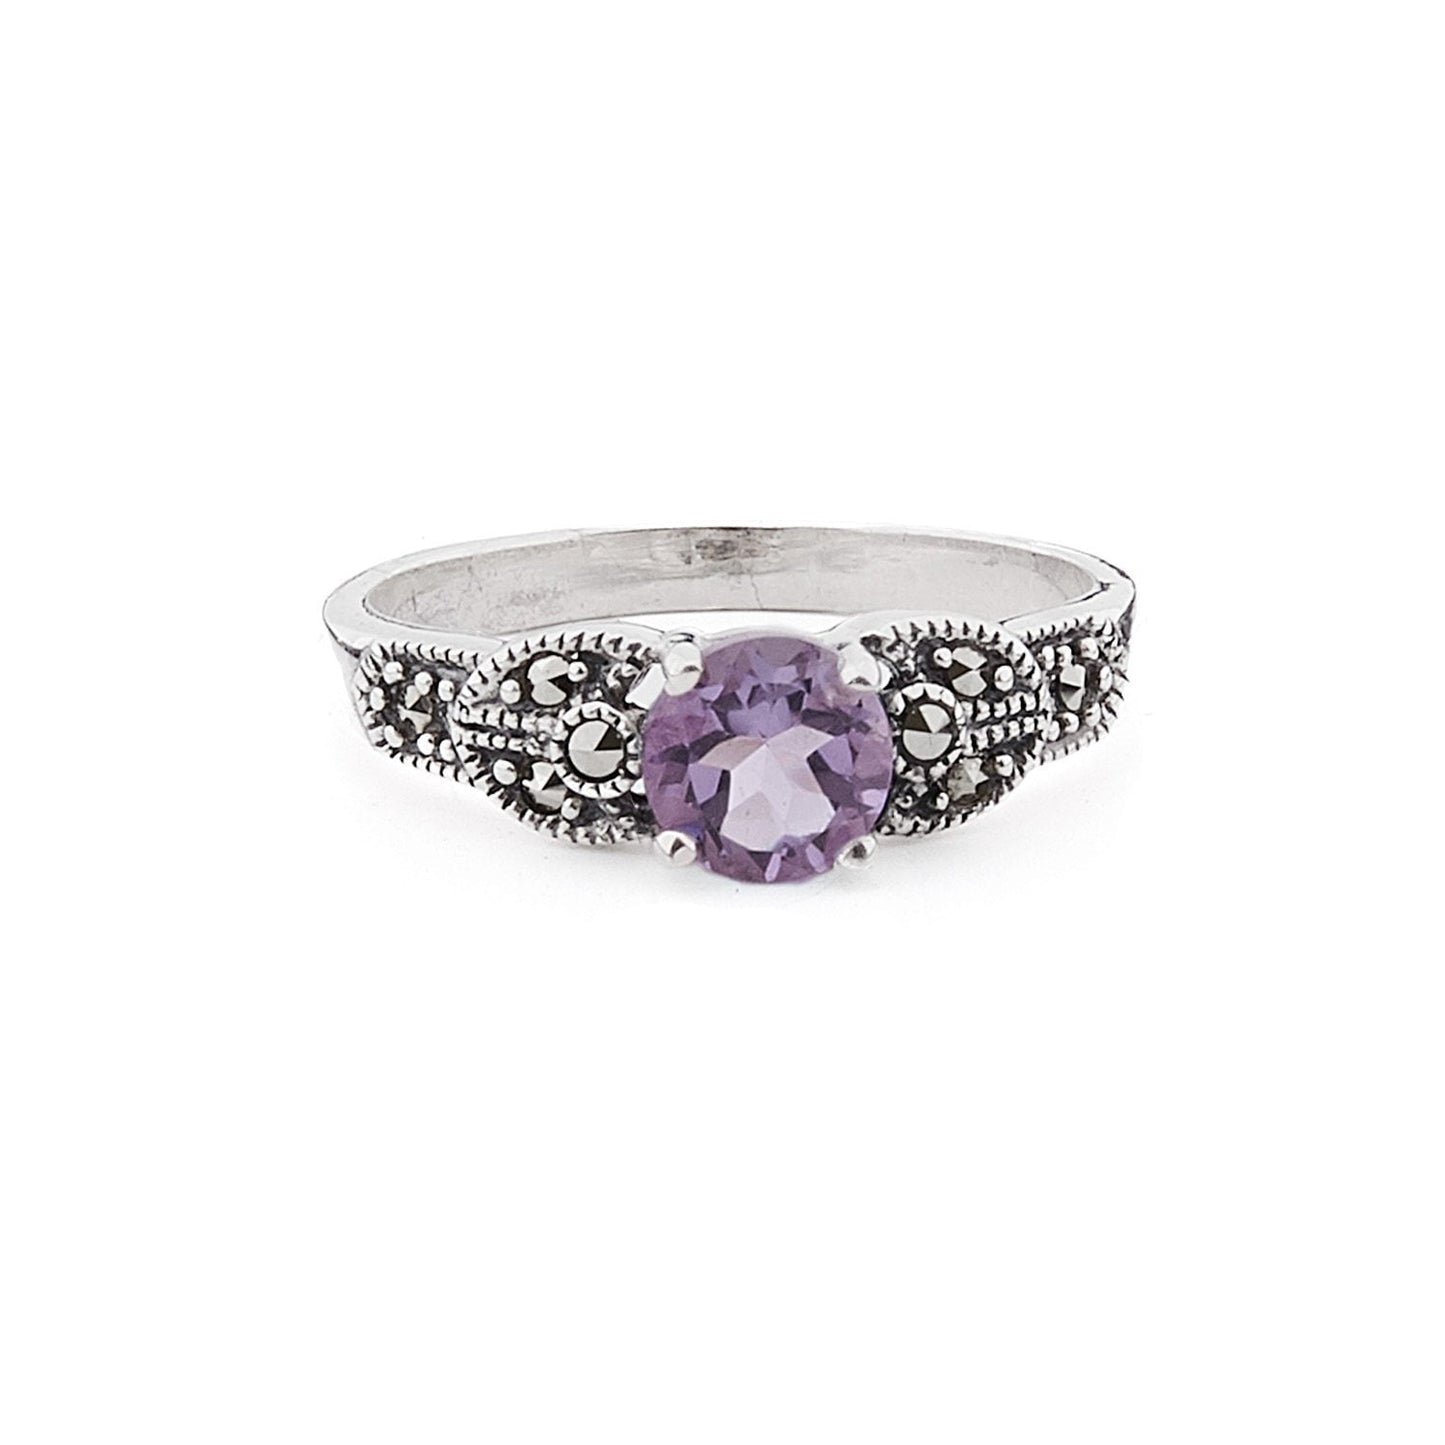 Art Deco Style Ring: Amethyst, Marcasite and Sterling Silver